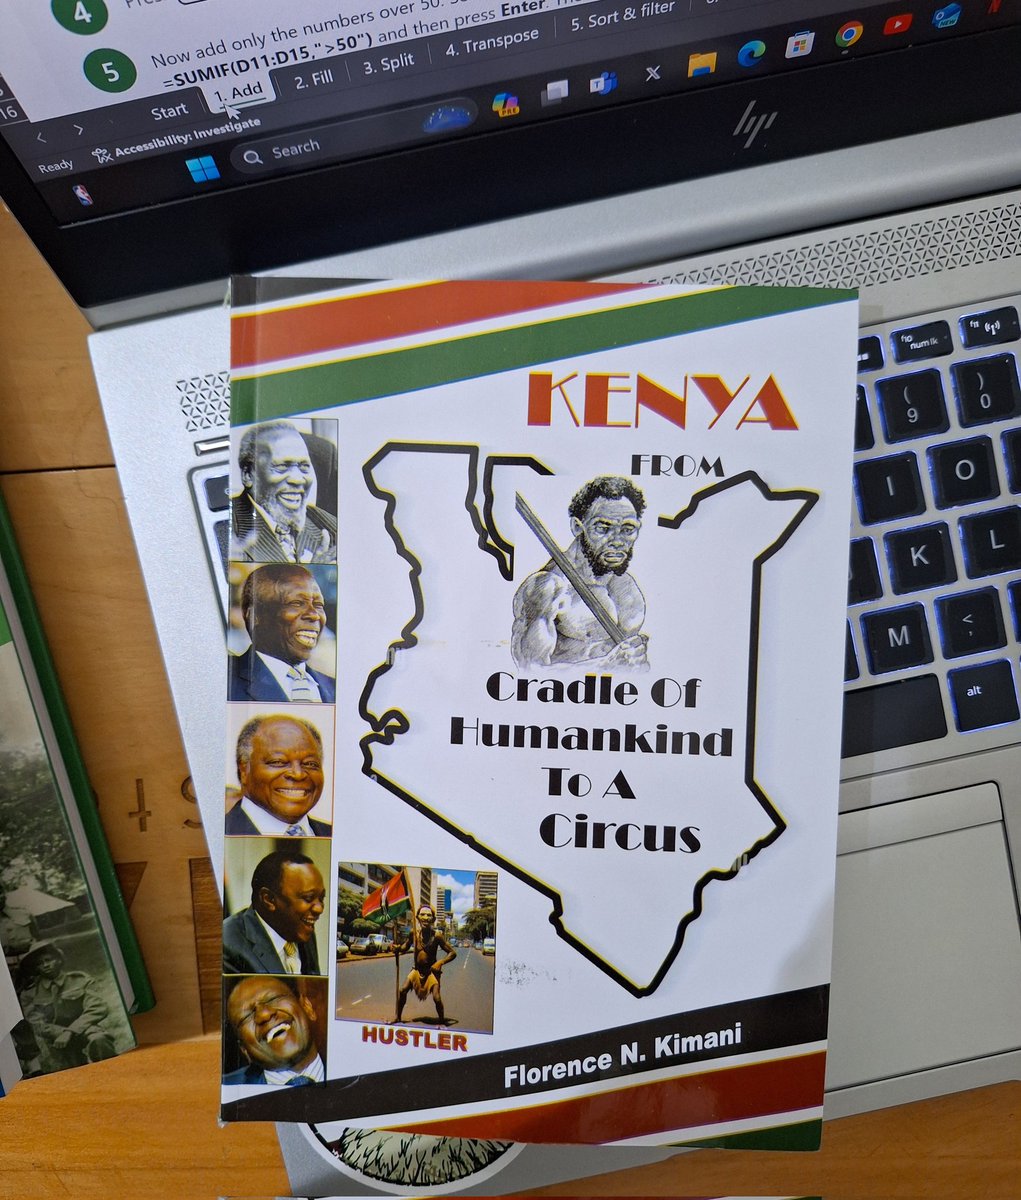 On my desk today: Kenya: From Cradle of Humankind to a Circus hilariously unravels Kenya's political absurdity, chaotic streets, and resilient spirit. A must-read rollercoaster of scandals and vibrant culture!